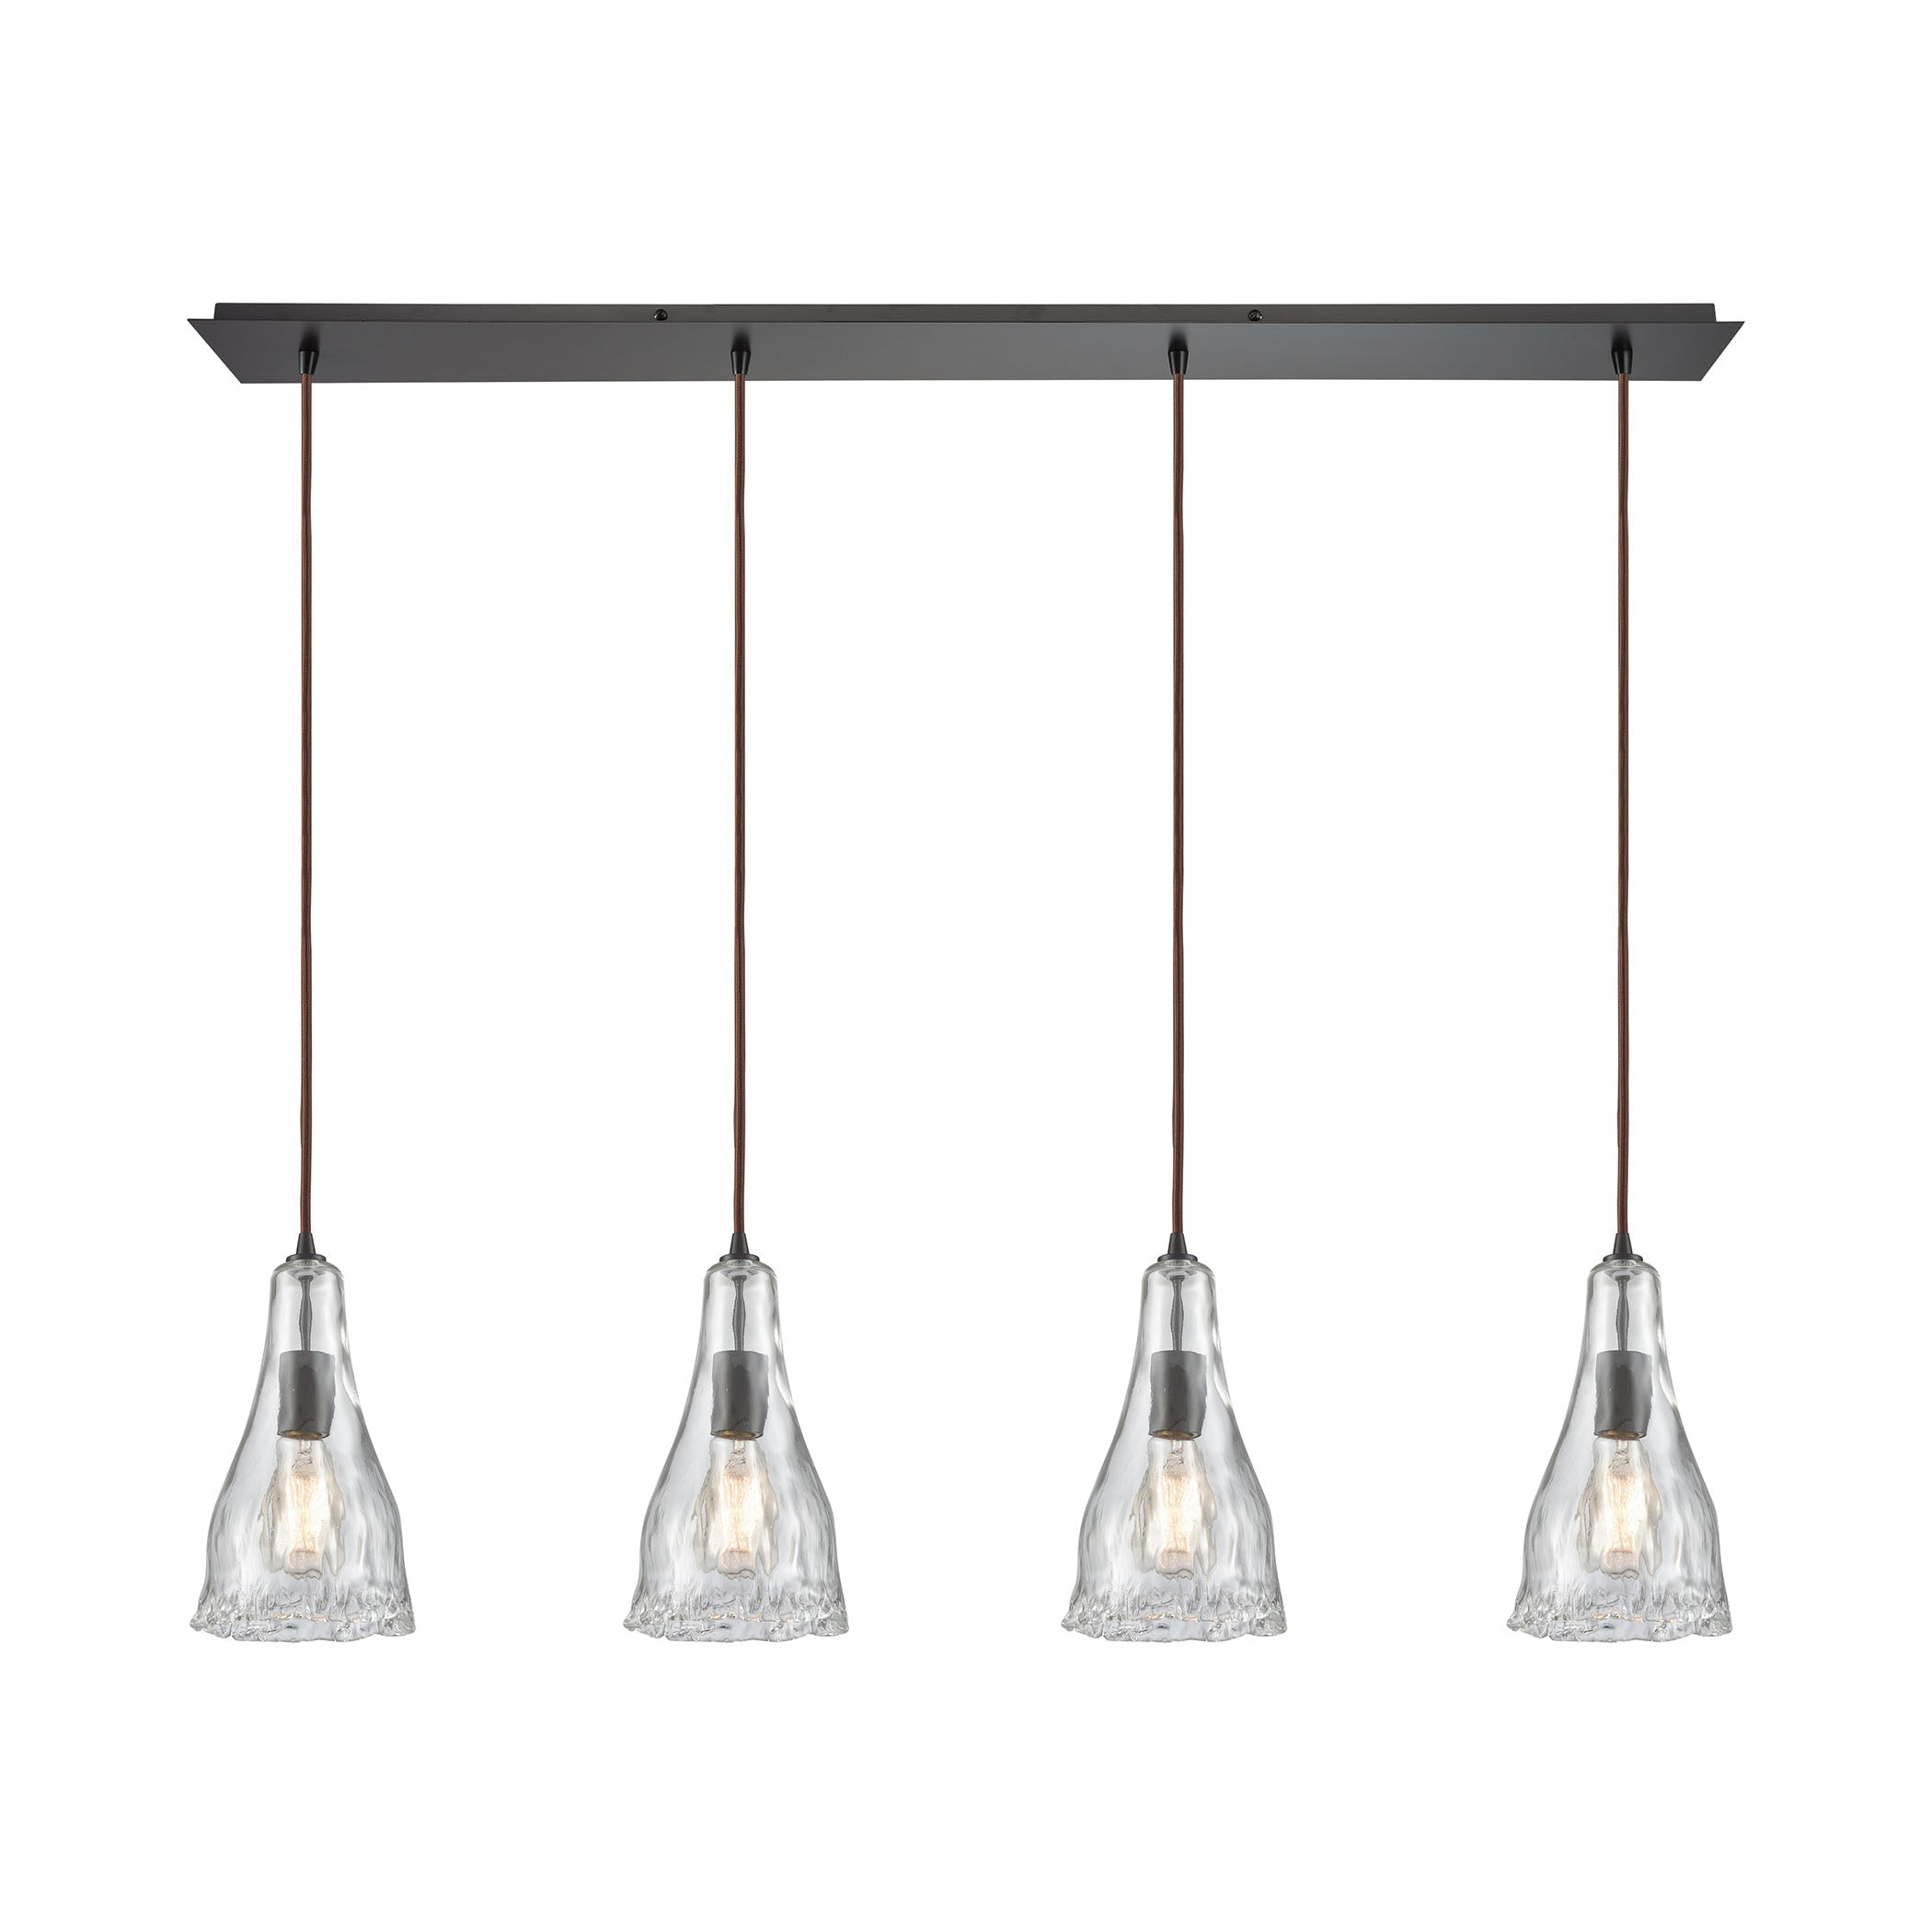 ELK Lighting 10446/4LP Hand Formed Glass 4-Light Linear Pendant Fixture in Oiled Bronze with Clear Hand-formed Glass